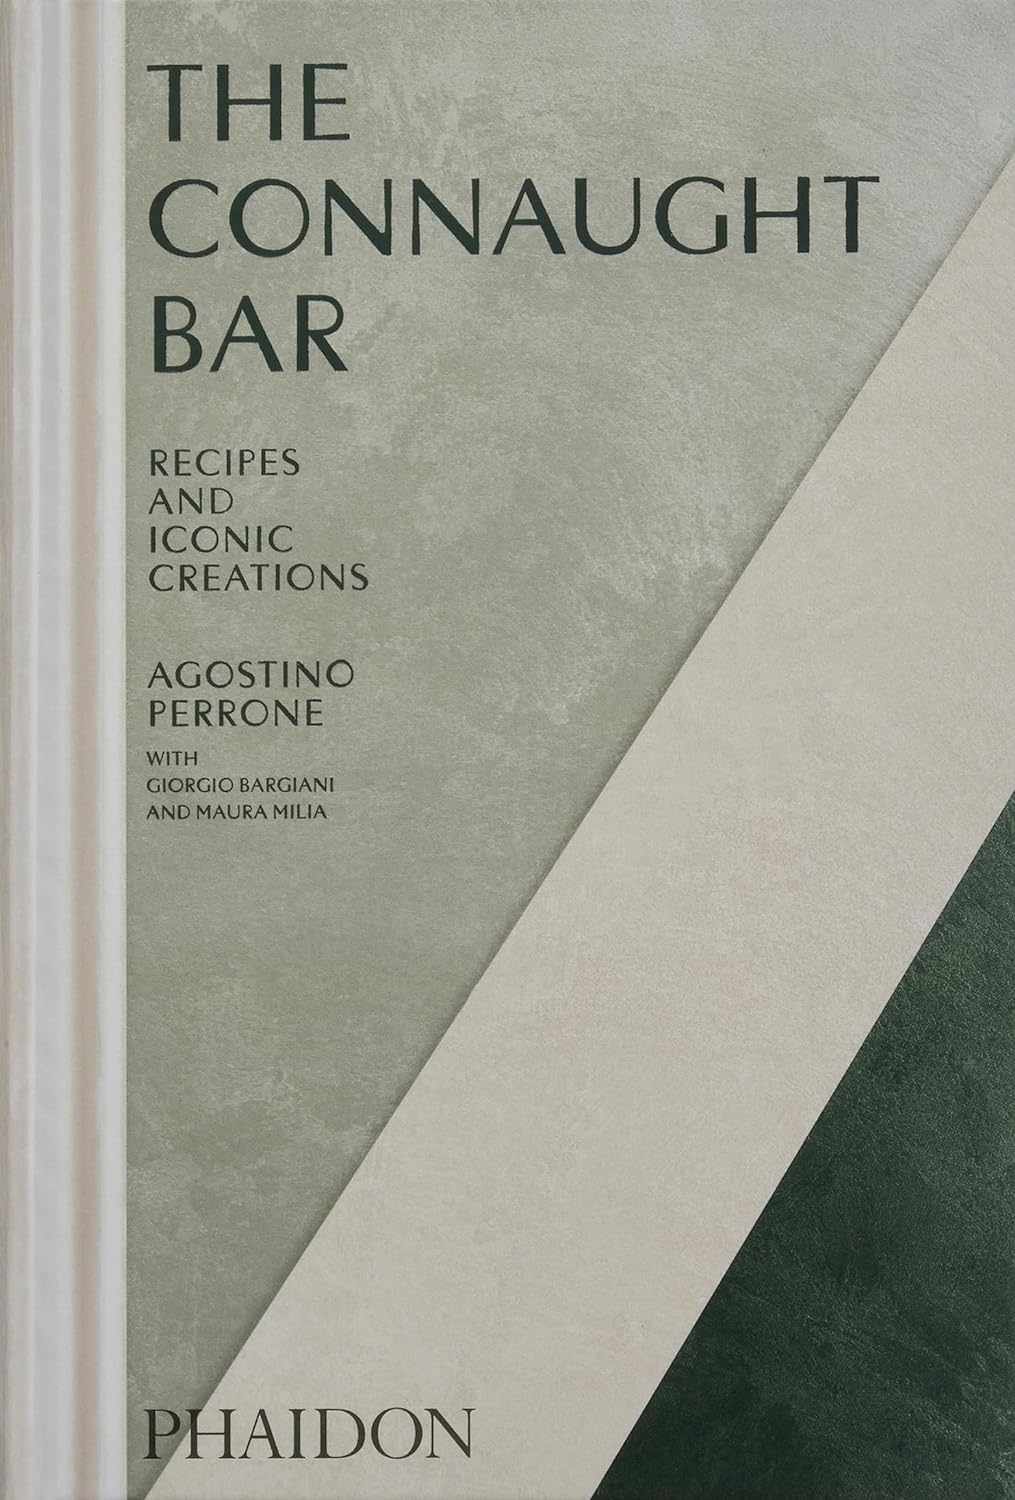 Connaught Bar: Recipes and Iconic Creations